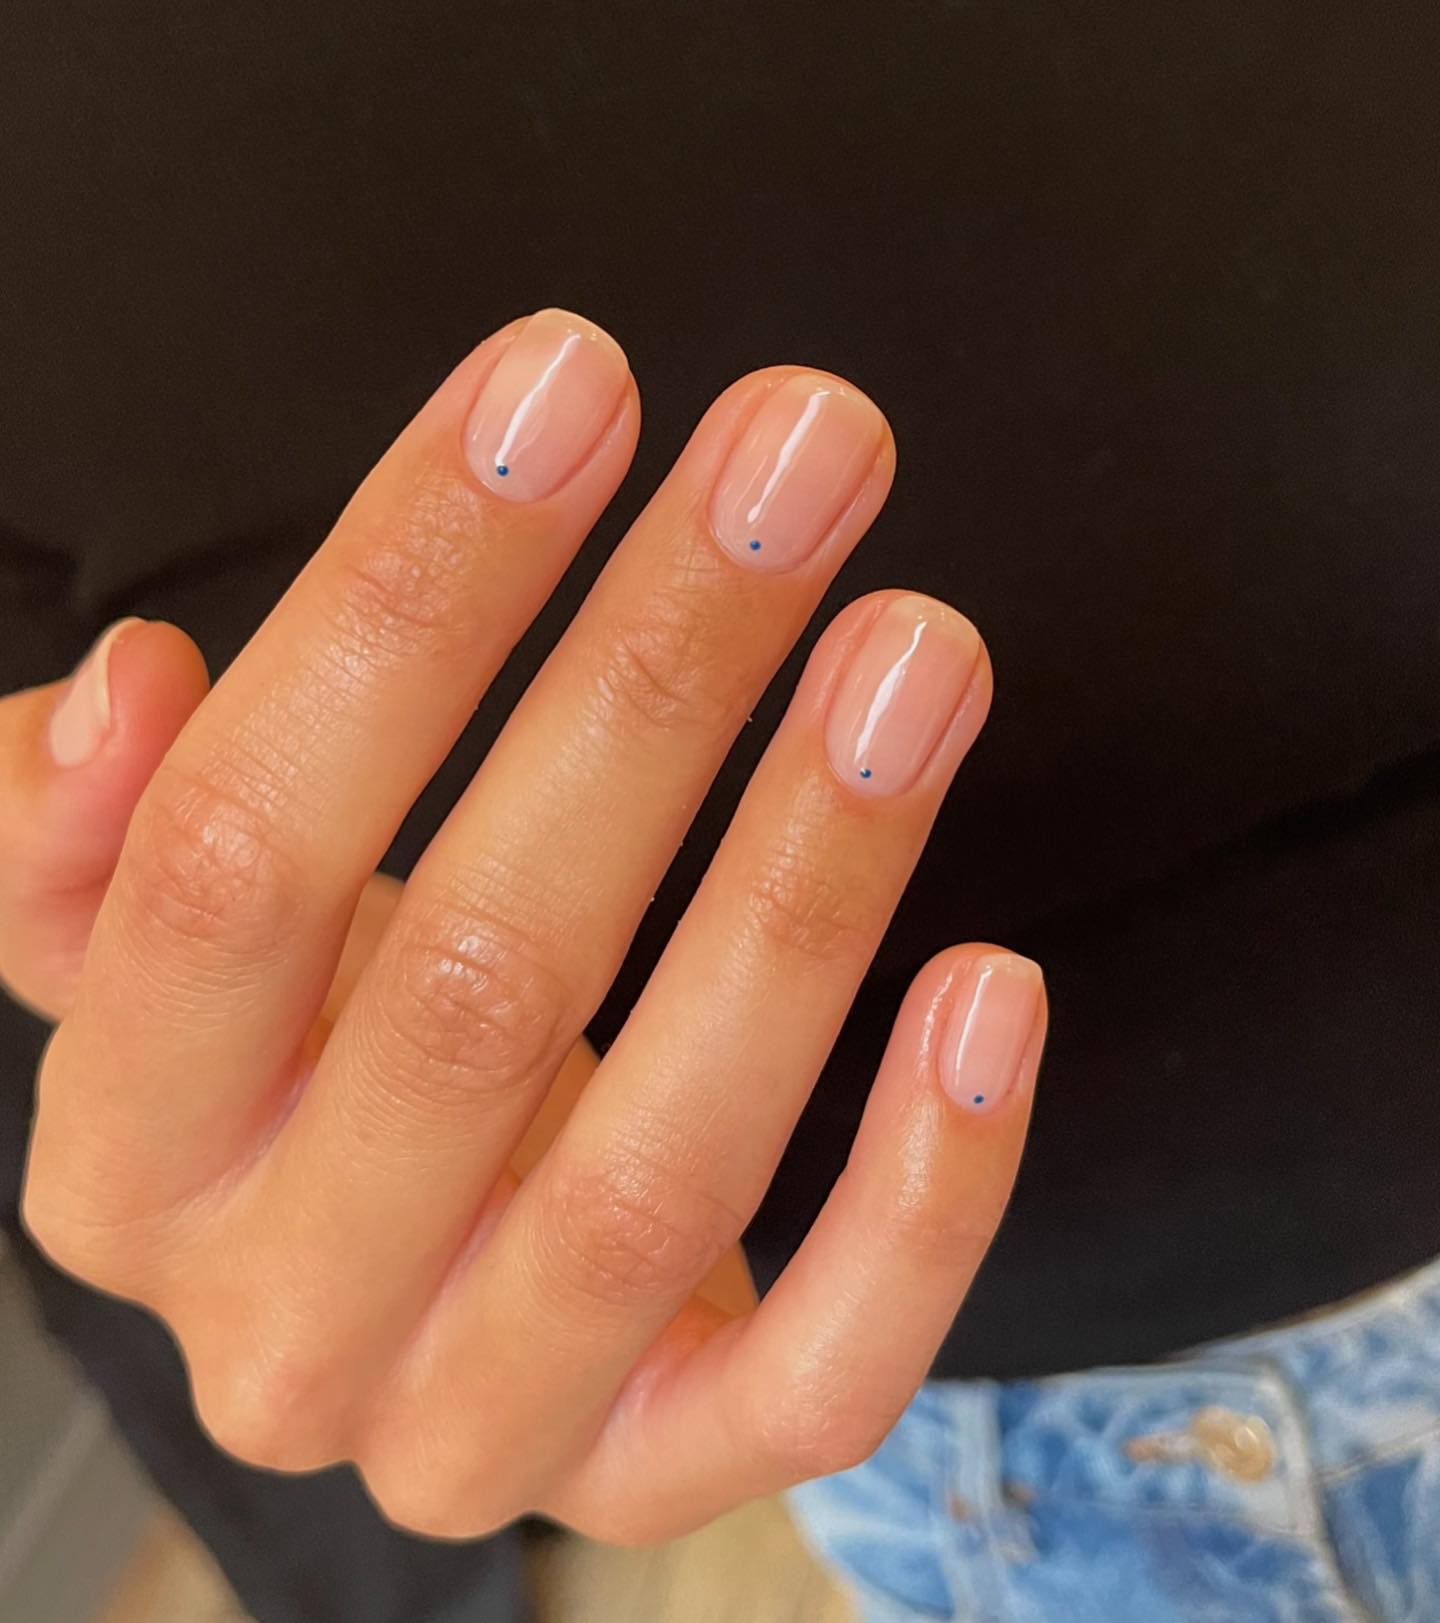 At my place of work, I am not allowed to wear nail polish. This is  devastating for me - my gel nails are my pride and joy. Is there a nail  polish